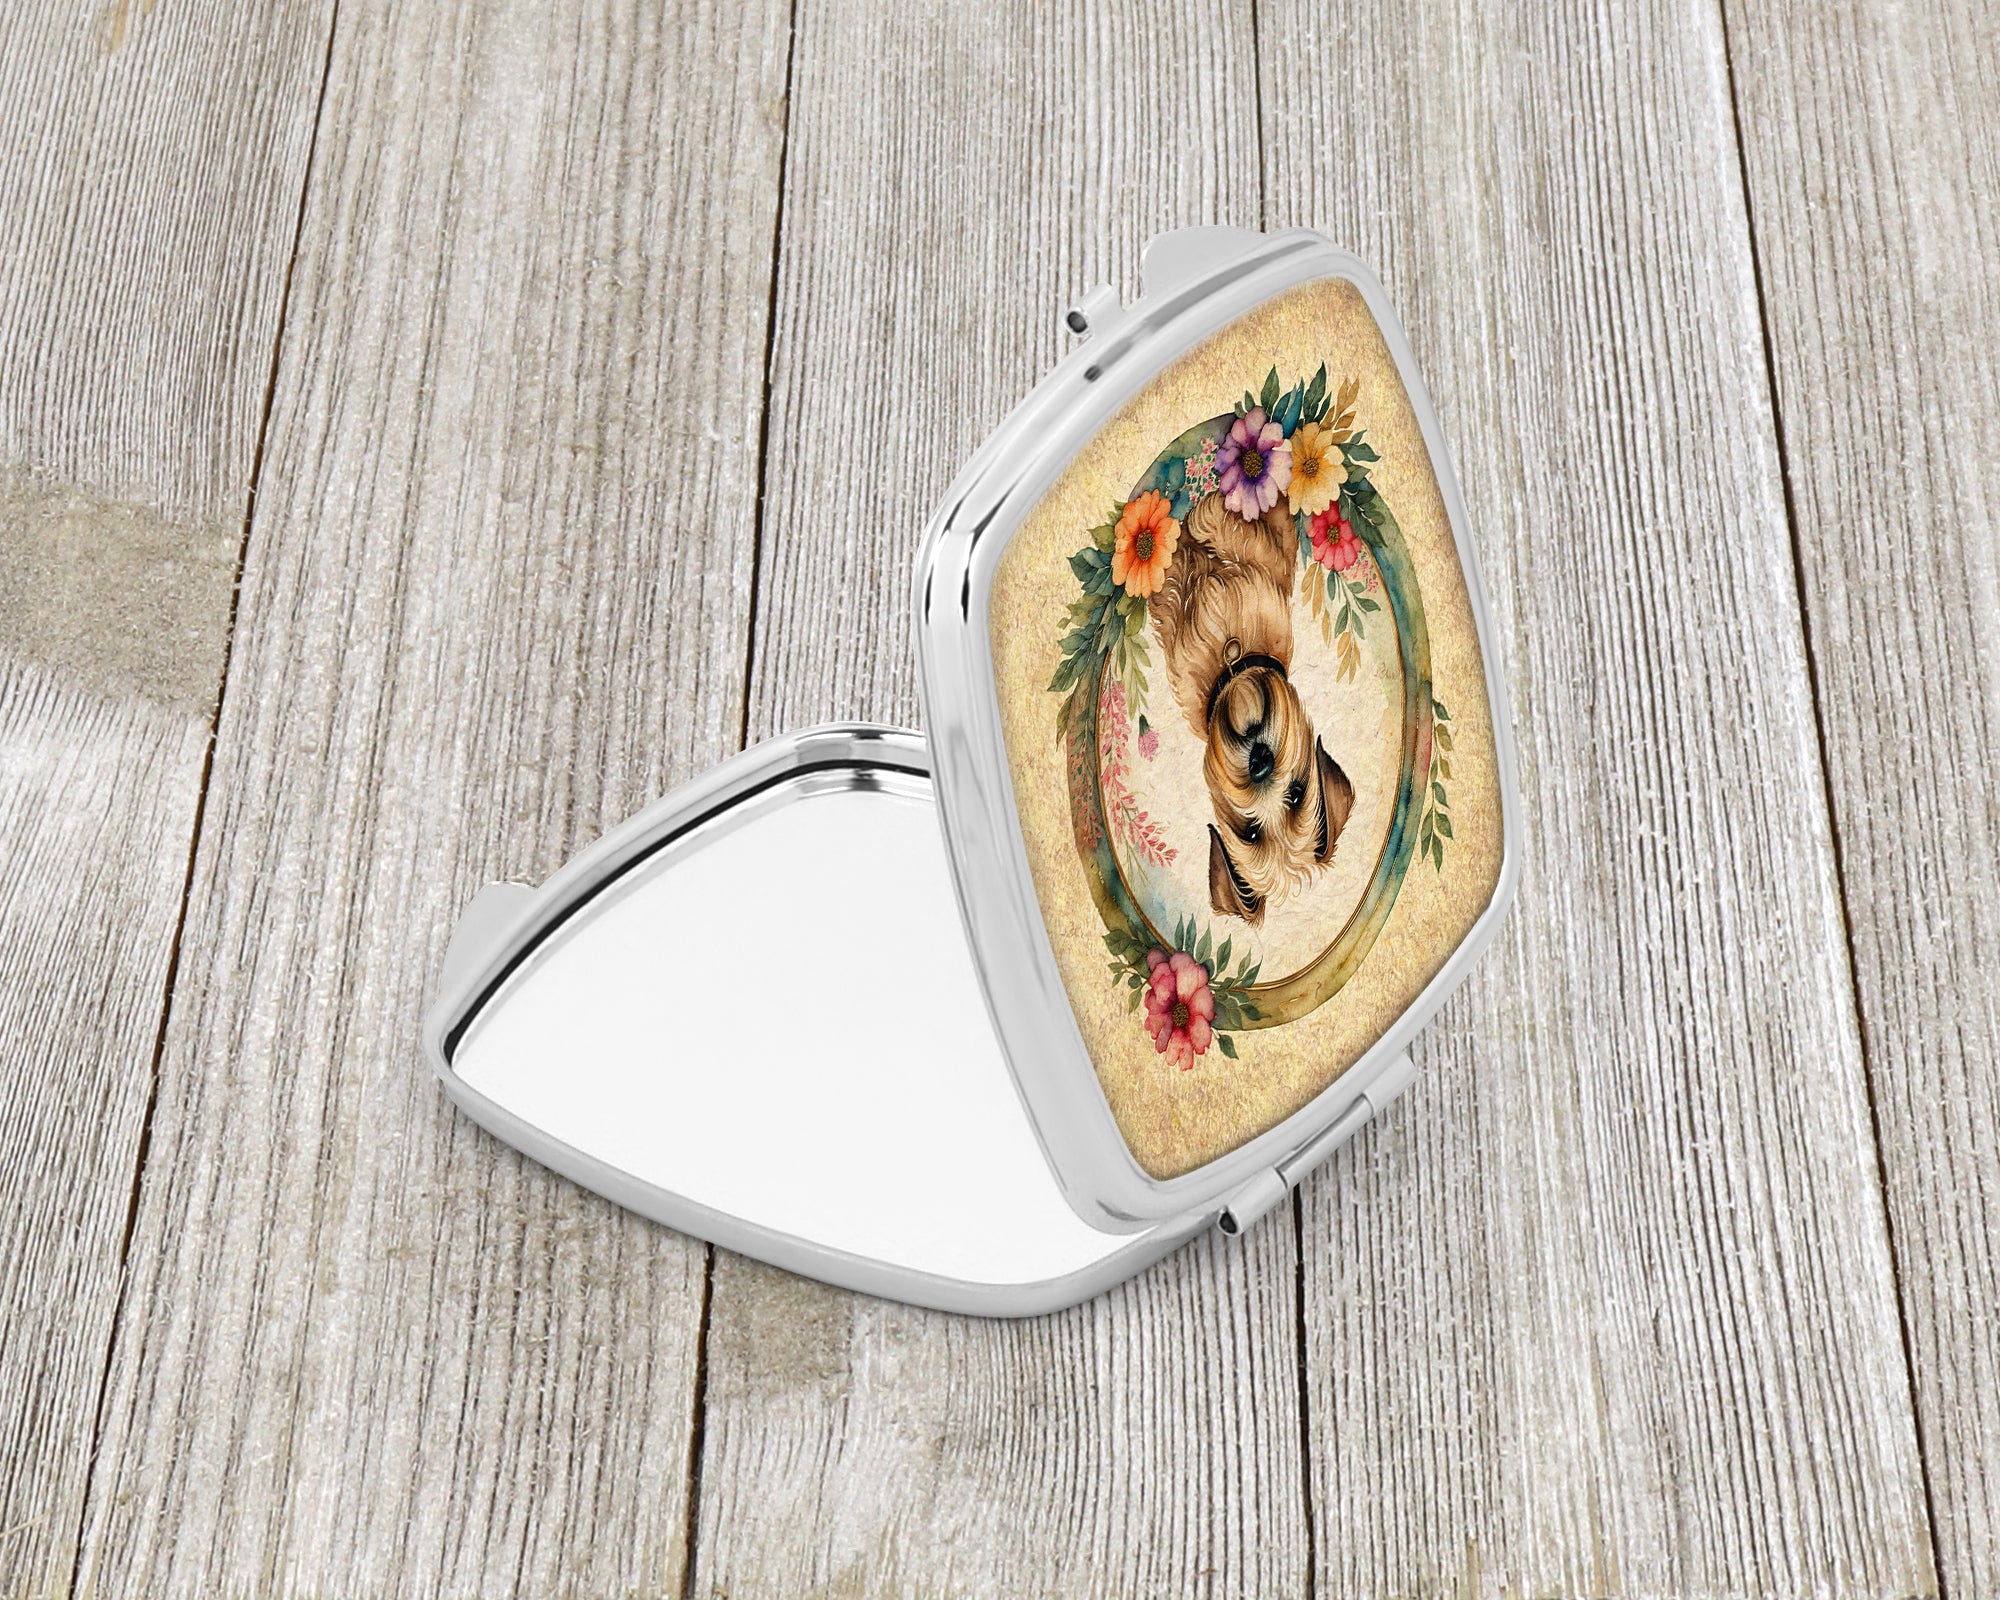 Buy this Wheaten Terrier and Flowers Compact Mirror